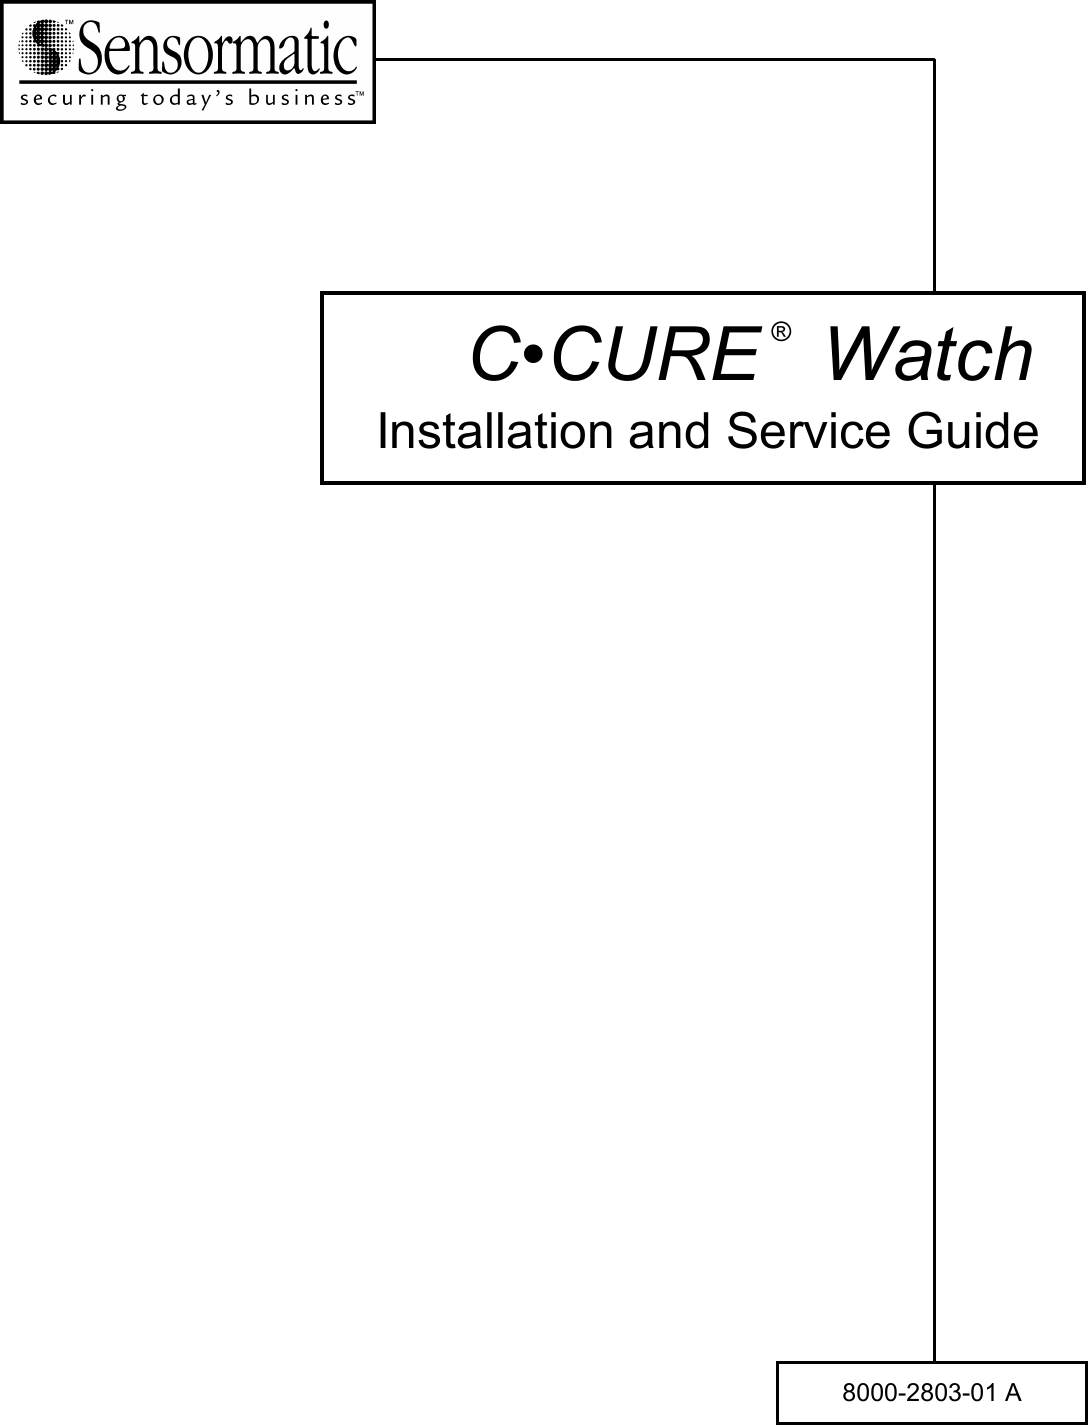 8000-2803-01 AC•CURE ® WatchInstallation and Service Guide